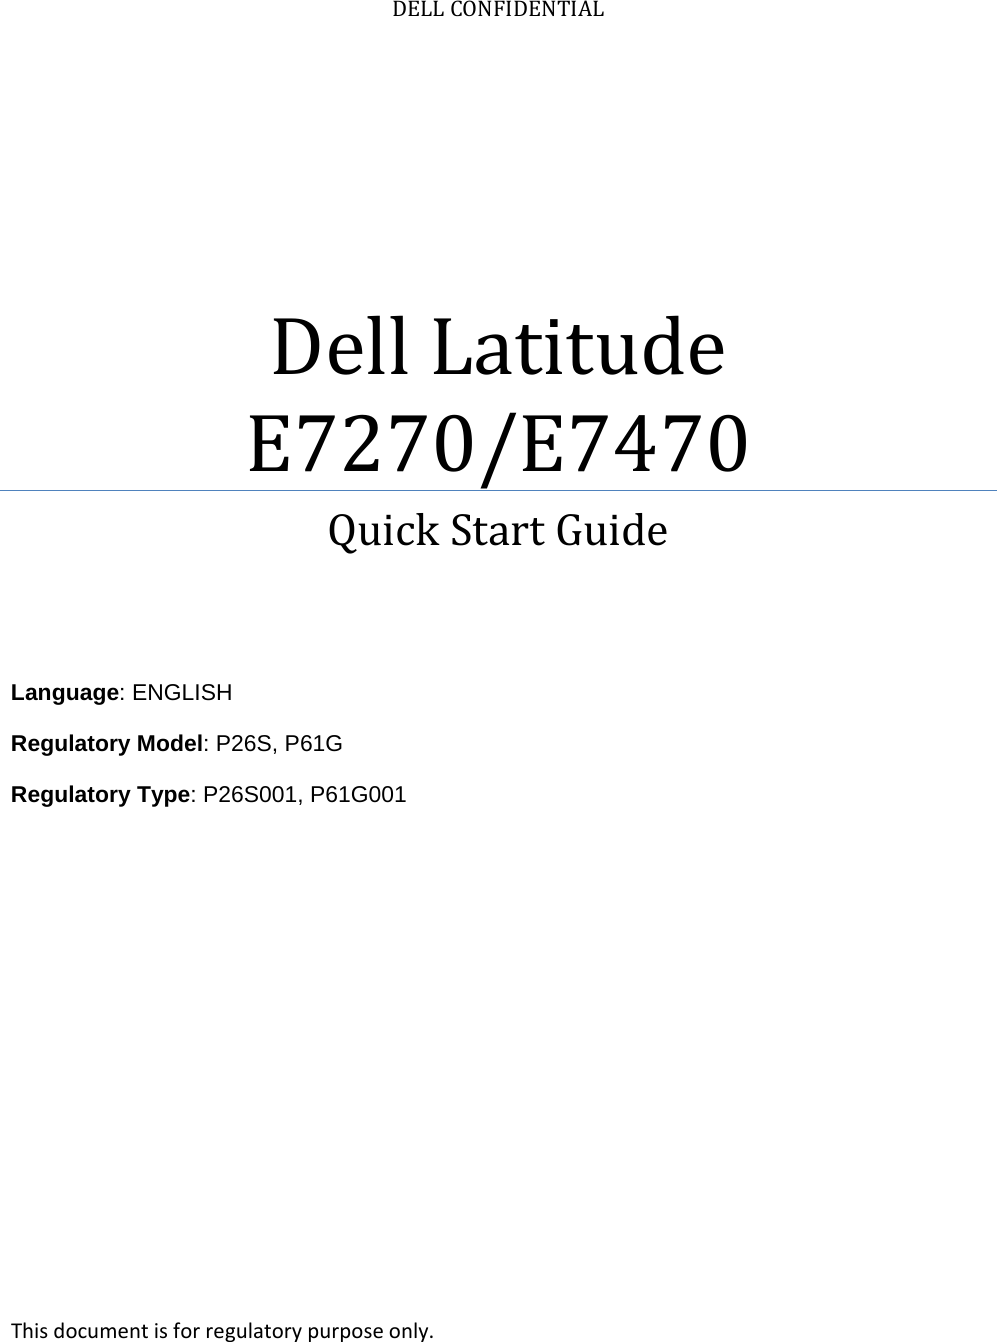 DELLCONFIDENTIALDellLatitudeE7270/E7470QuickStartGuideLanguage: ENGLISH Regulatory Model: P26S, P61G  Regulatory Type: P26S001, P61G001     Thisdocumentisforregulatorypurposeonly.